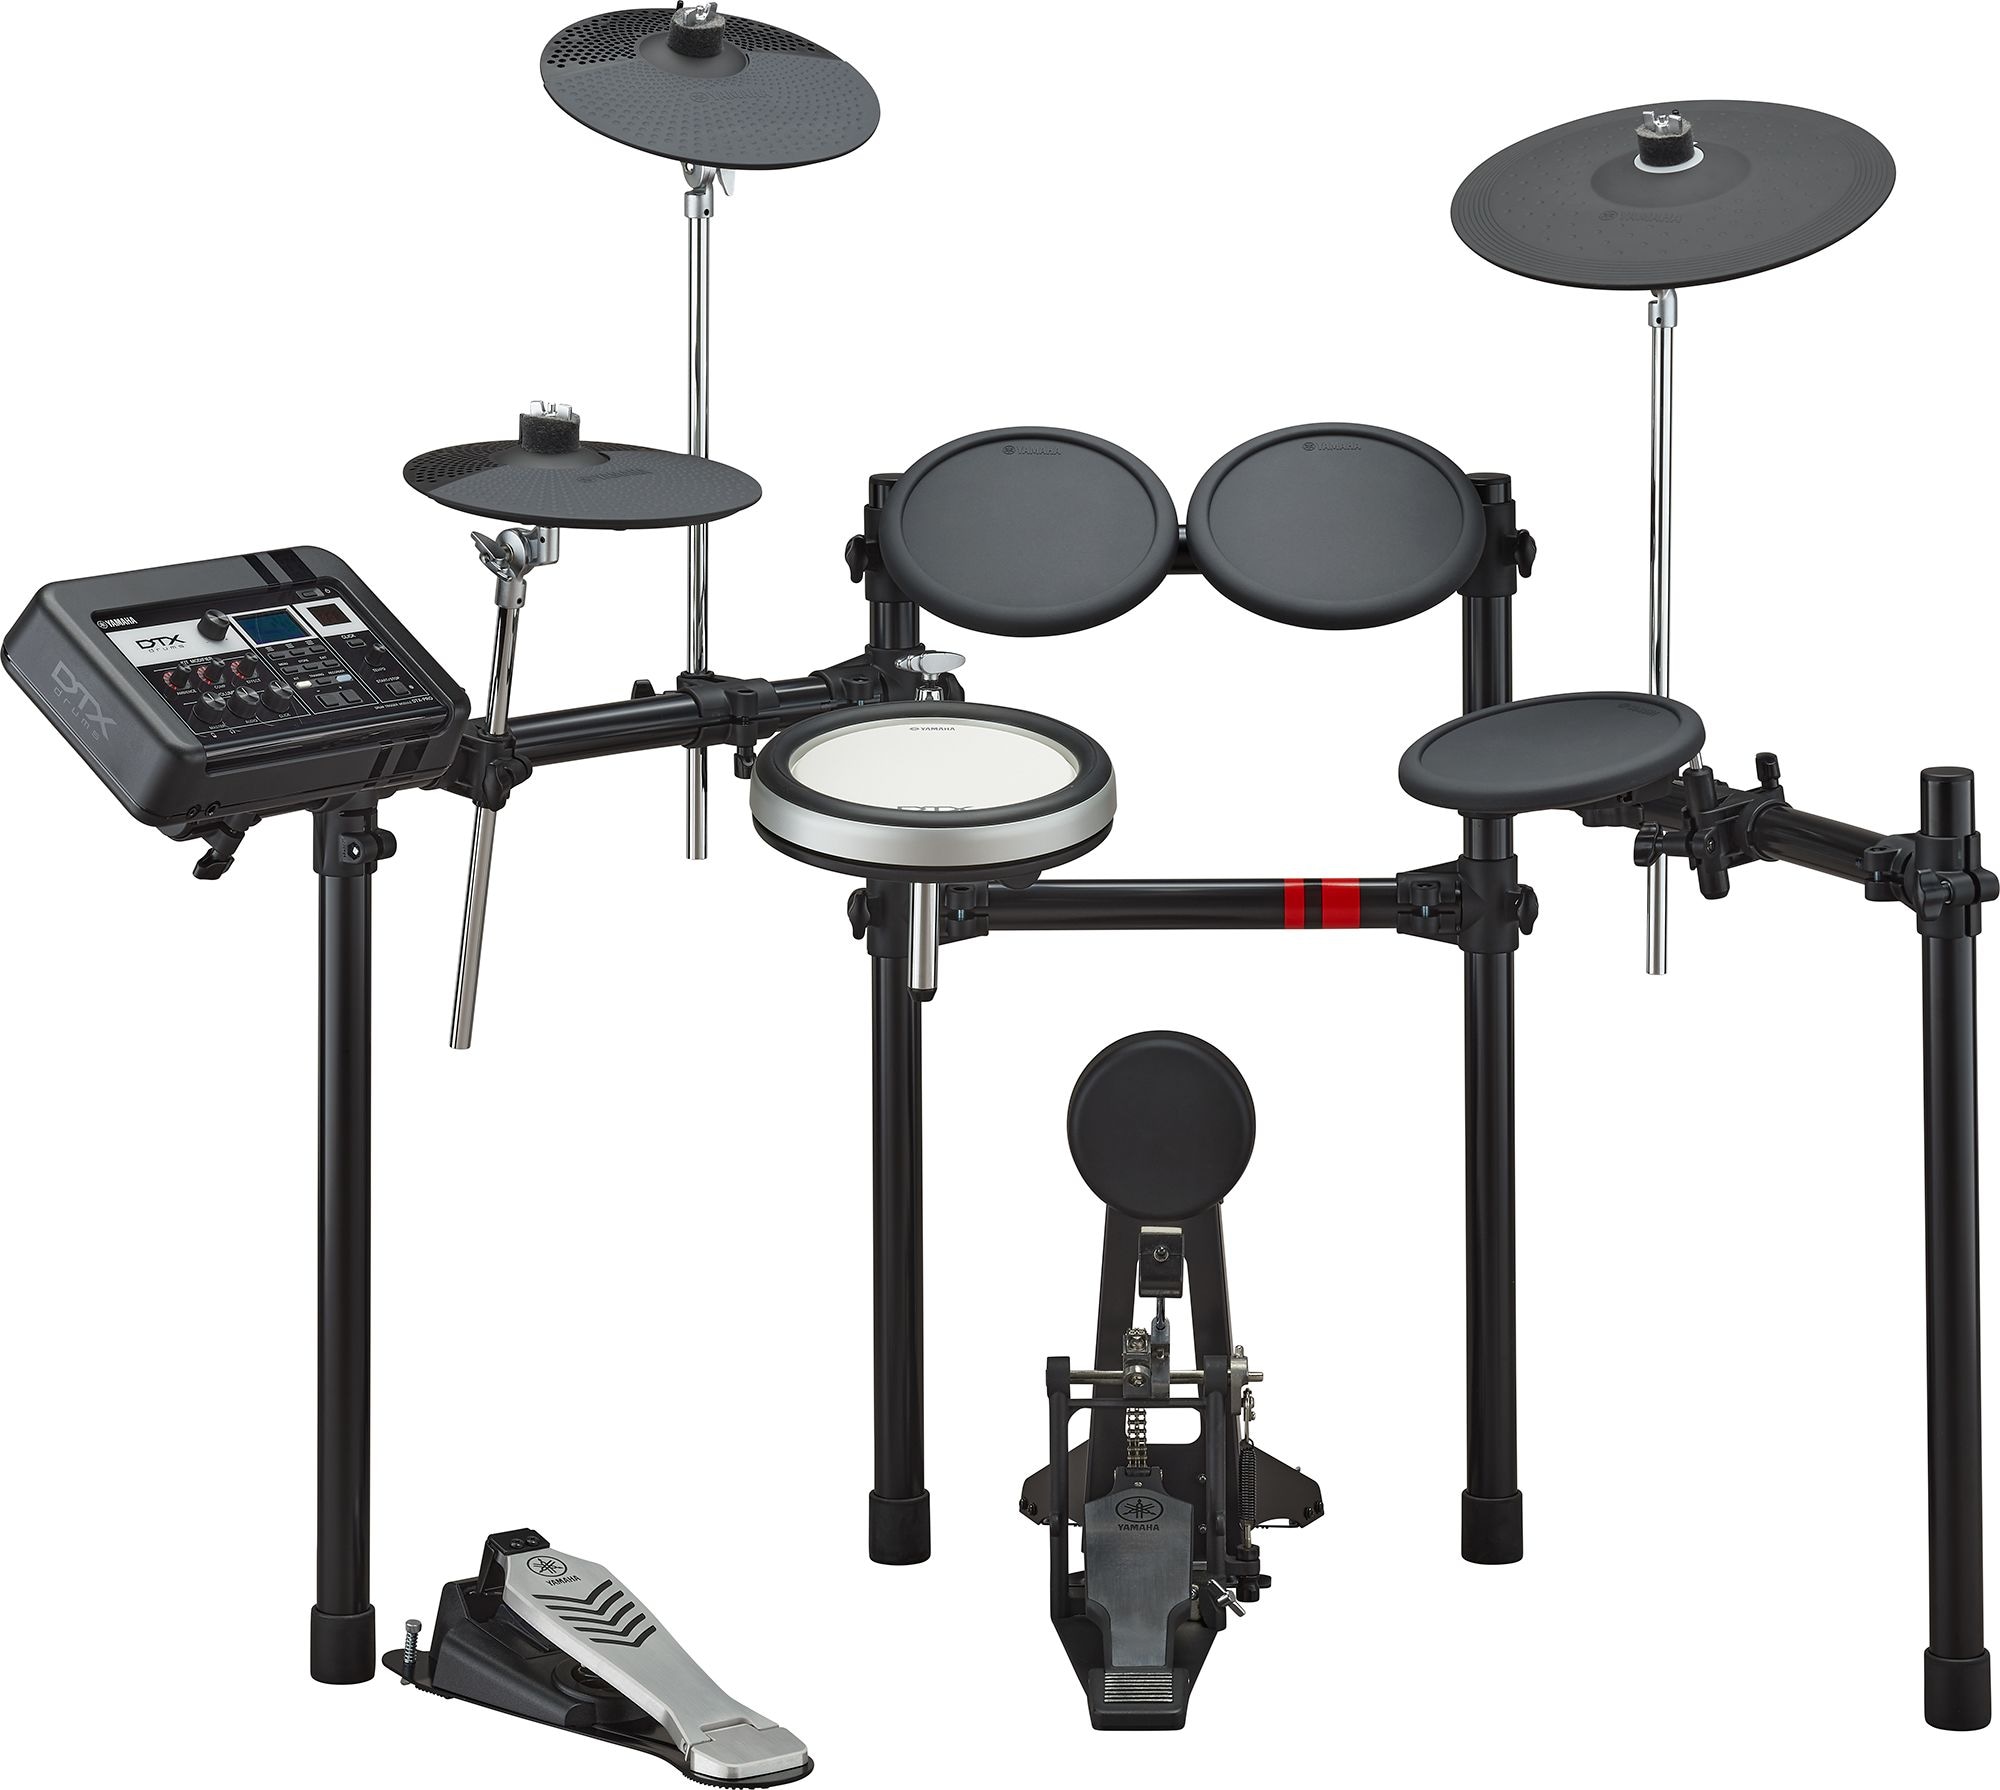 DTX6 Series - Products - - Drum Musical Electronic - Drums - America Latin - / - Yamaha Drums Instruments CIS Electronic / / Oceania / - Africa / Middle Kits Products East Asia